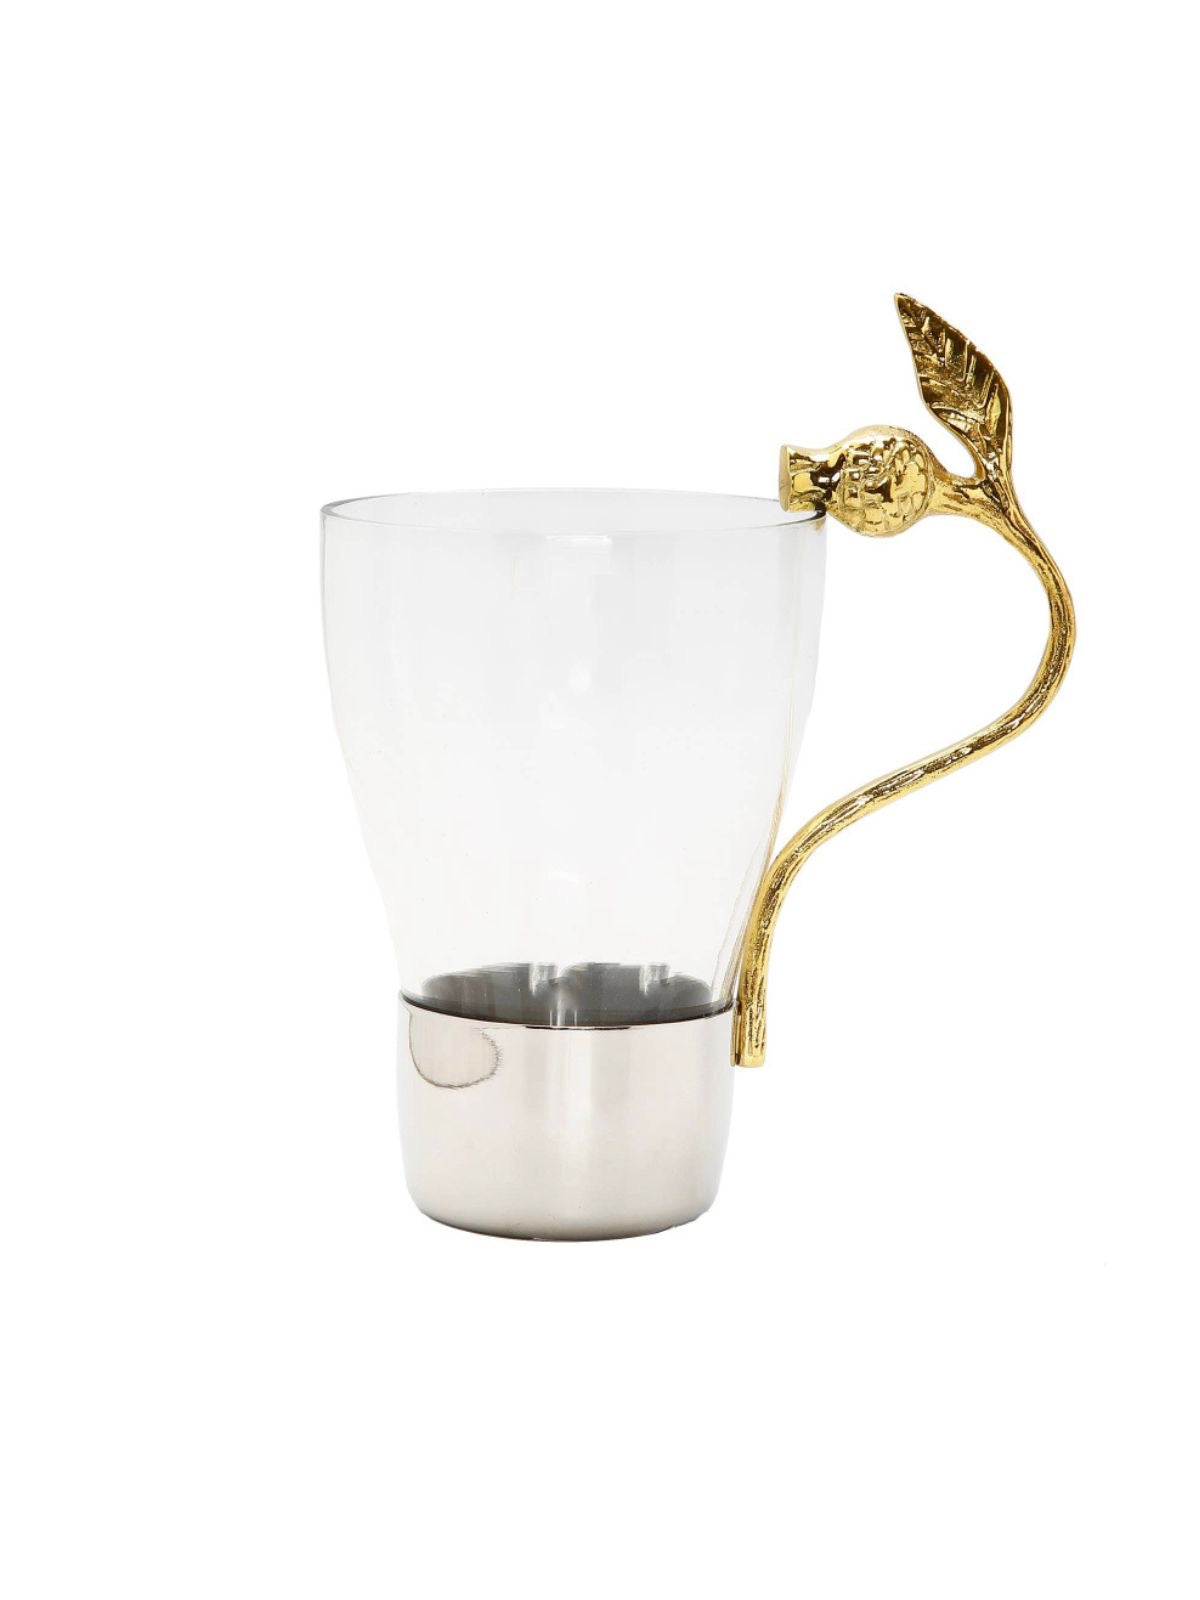 This Beautiful Silver Base Glass Mug Was Designed with An Elegant Gold Pomegranate Handle Available at KYA Home Decor